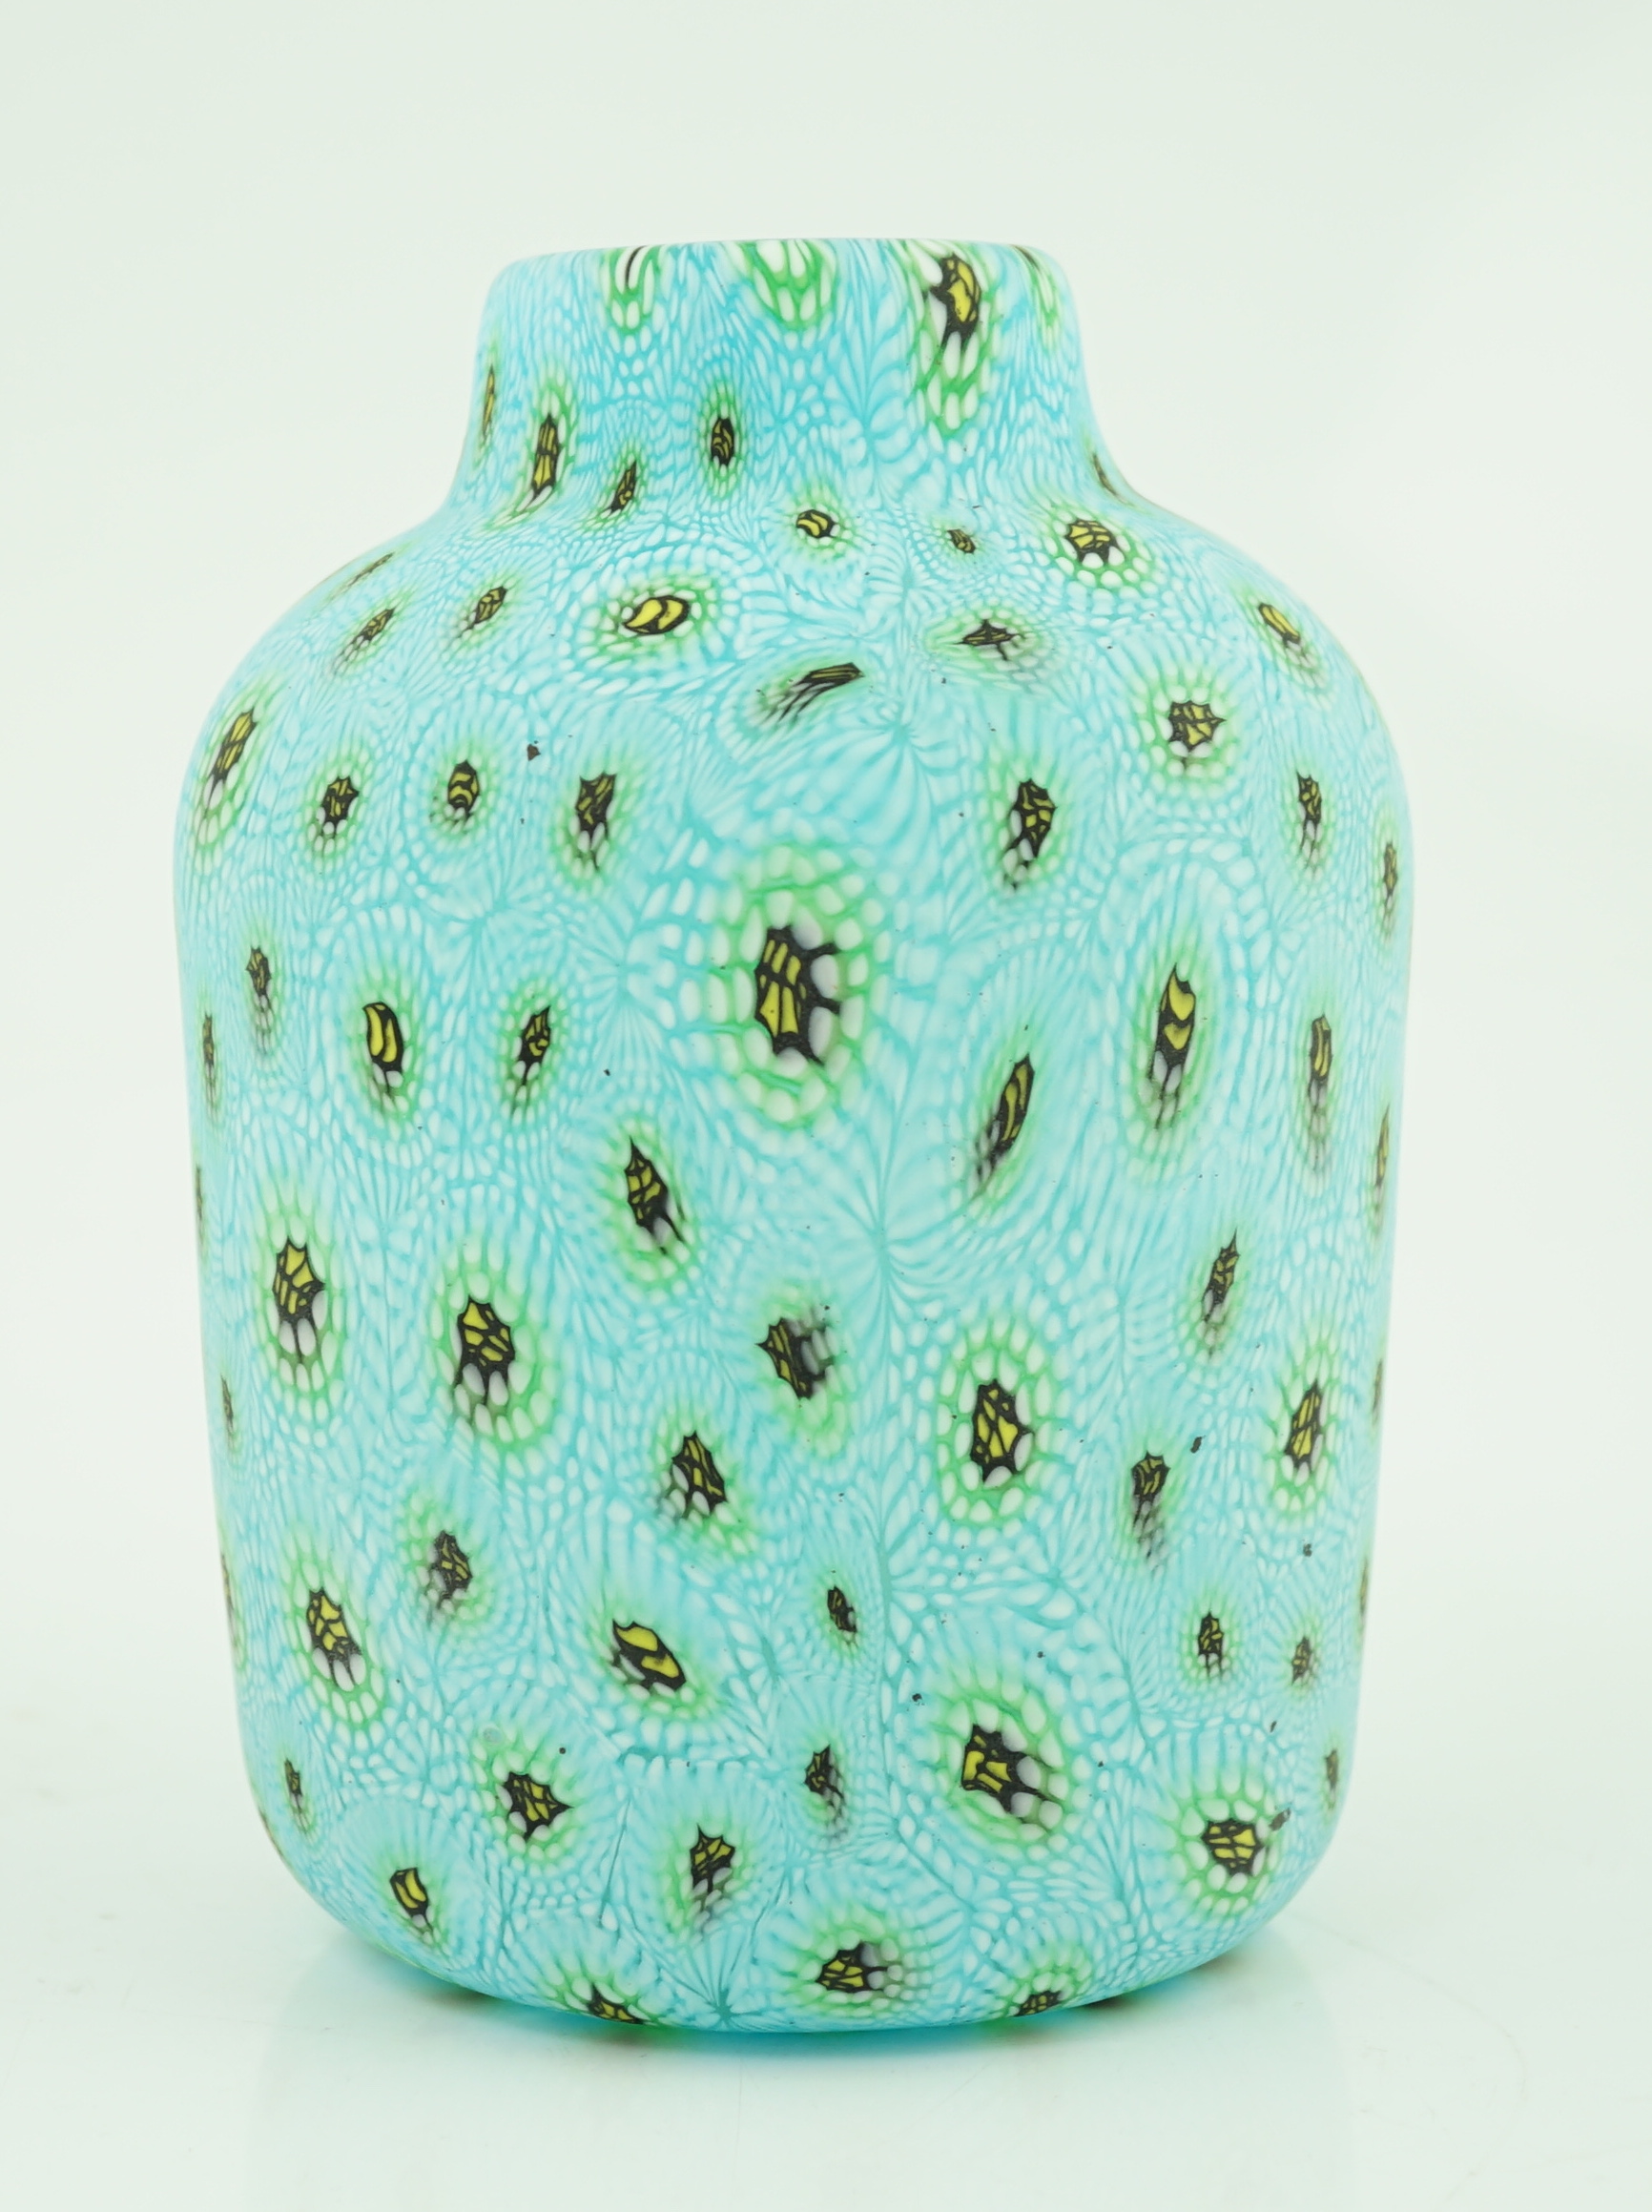 Vittorio Ferro (1932-2012) A Murano glass Murrine vase, with a yellow and green peacock feather ‘’eyes’’, design, on a turquoise ground, unsigned, 17.5cm, Please note this lot attracts an additional import tax of 20% on